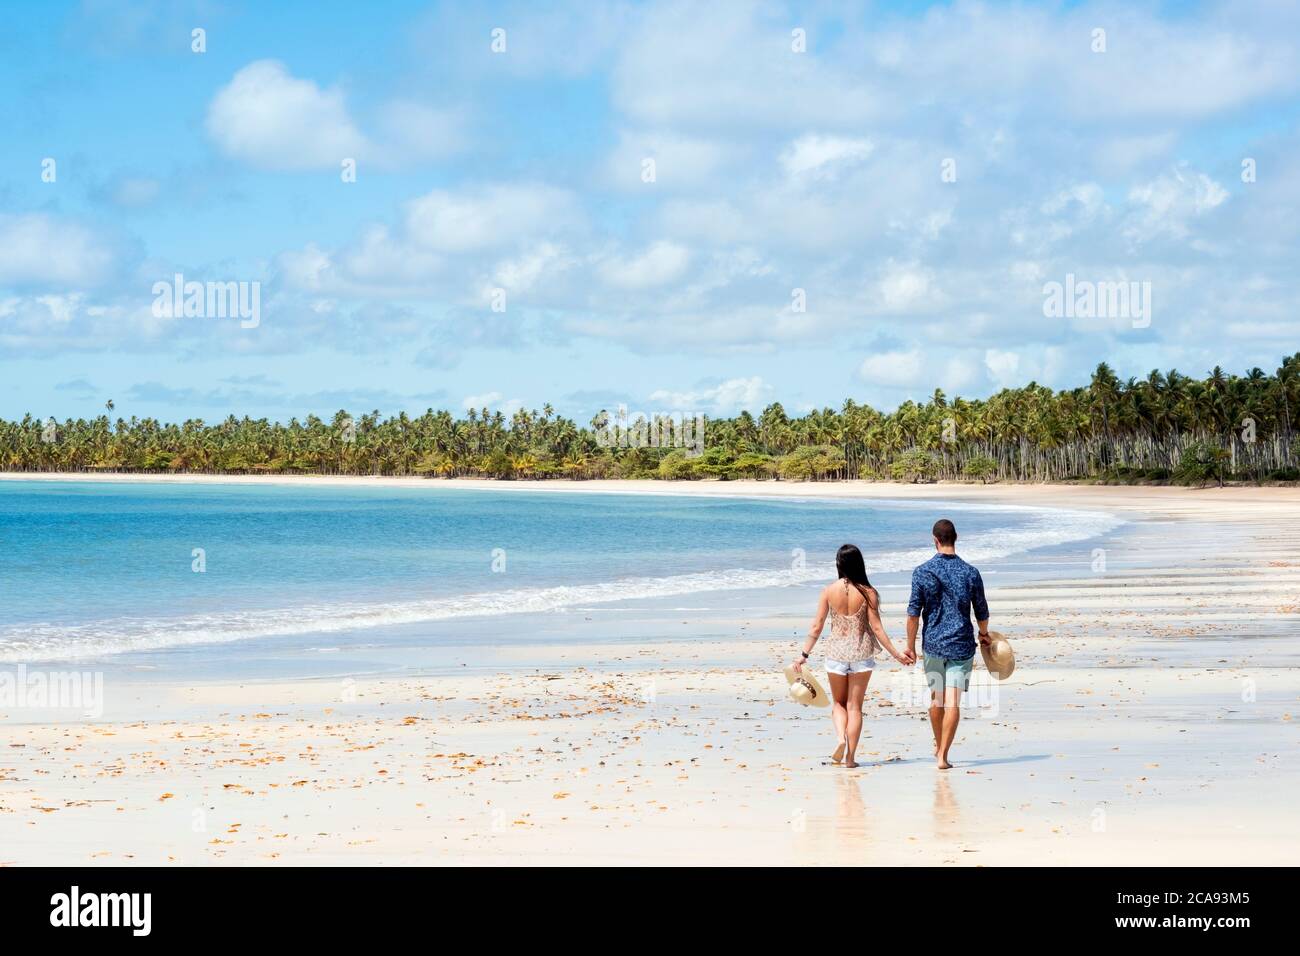 A good-looking Hispanic (Latin) couple walking on a deserted beach with backs to camera, Brazil, South America Stock Photo